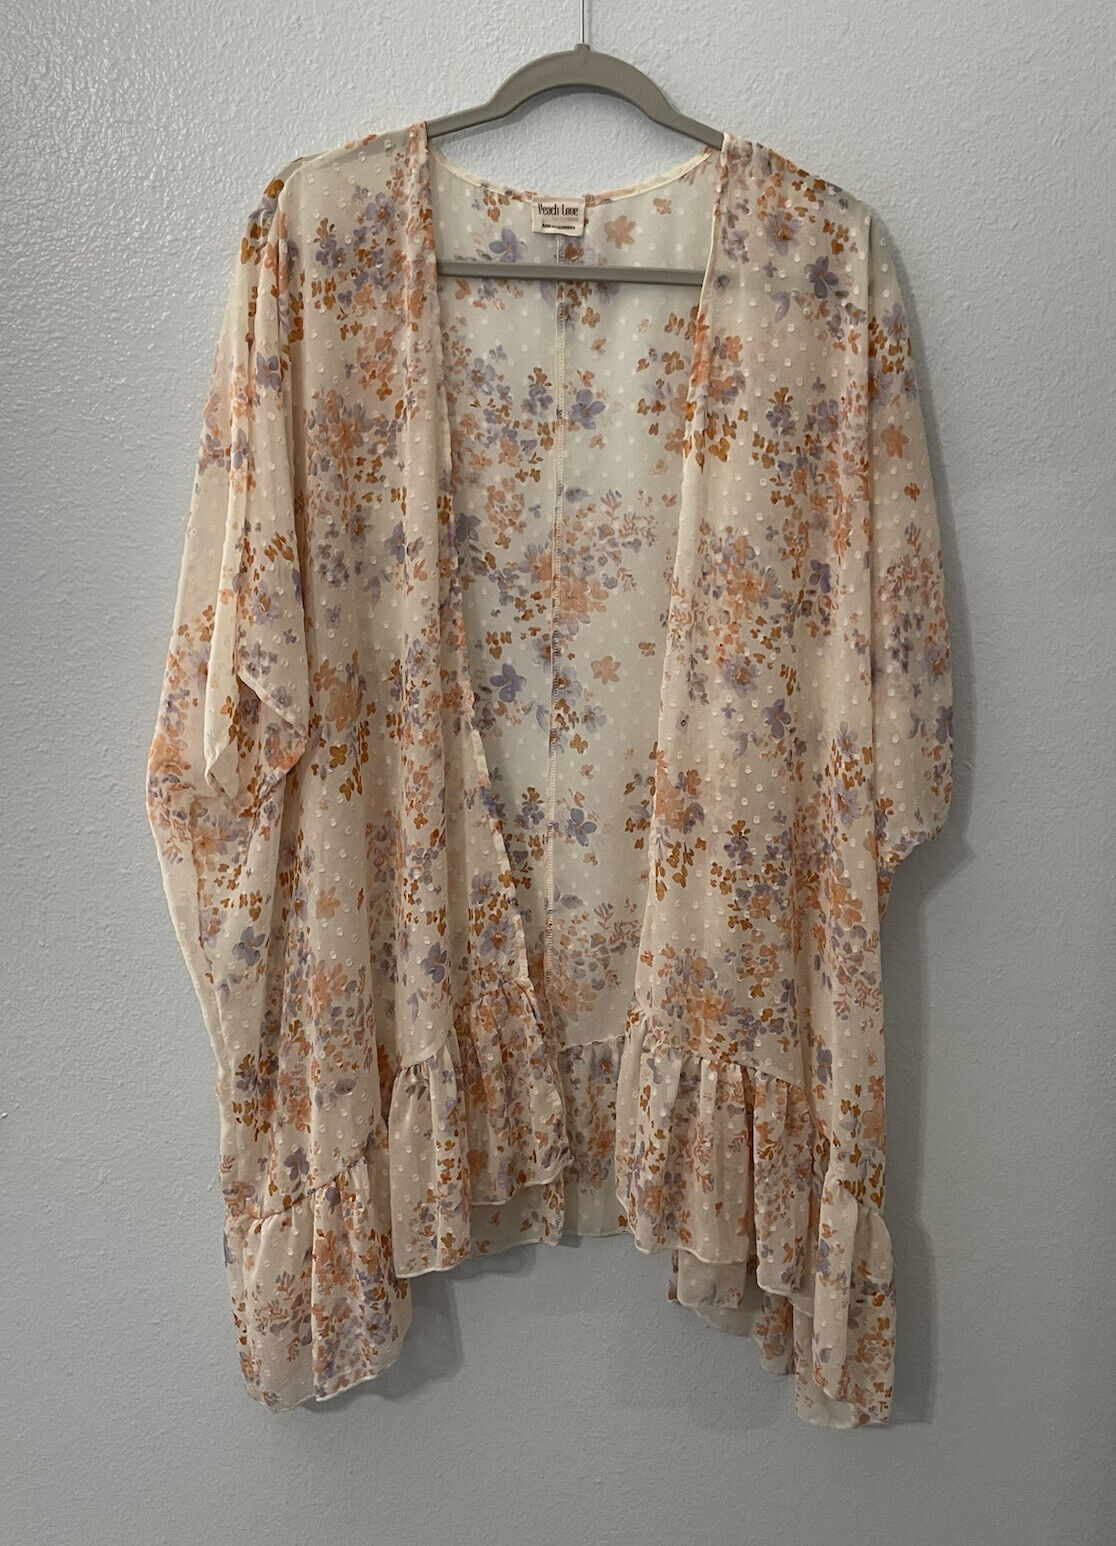 Kimono Cardigan Duster Womens Floral Sheer Open Front Size Small Fits Larger